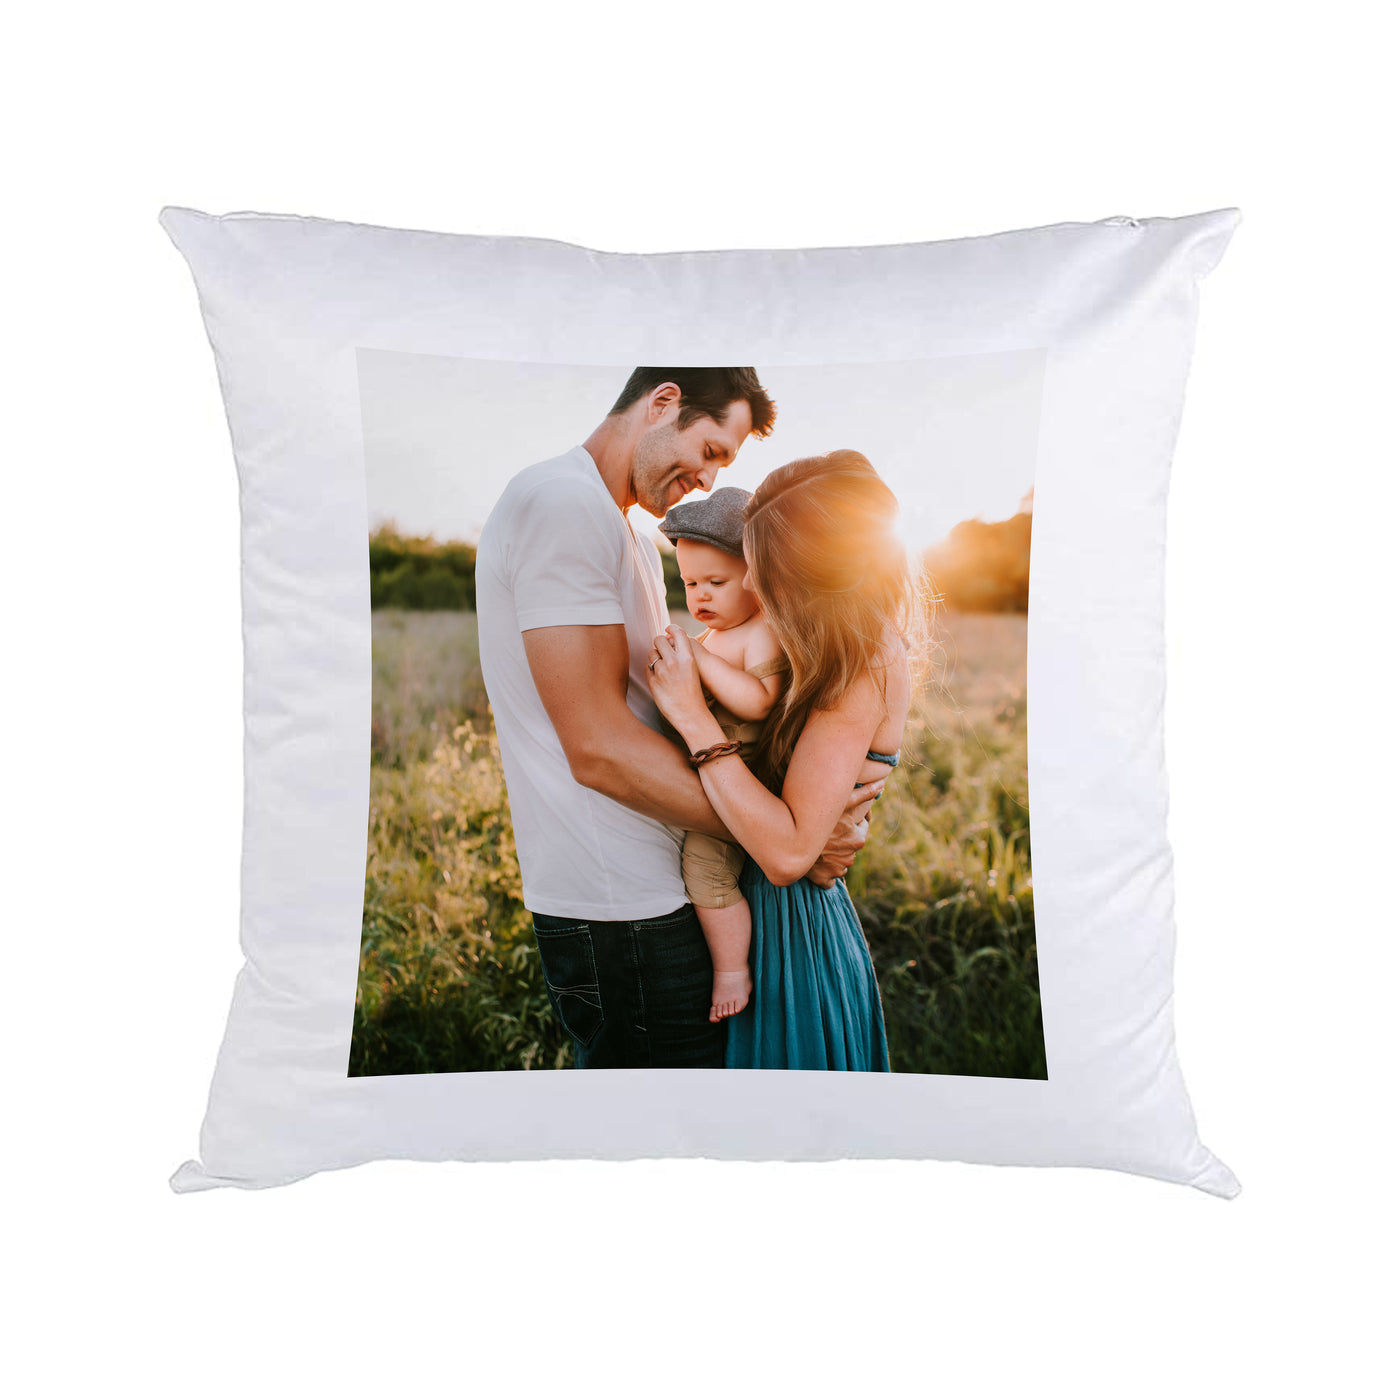 PERSONALISE CUSHION - ADD IMAGE AND TEXT